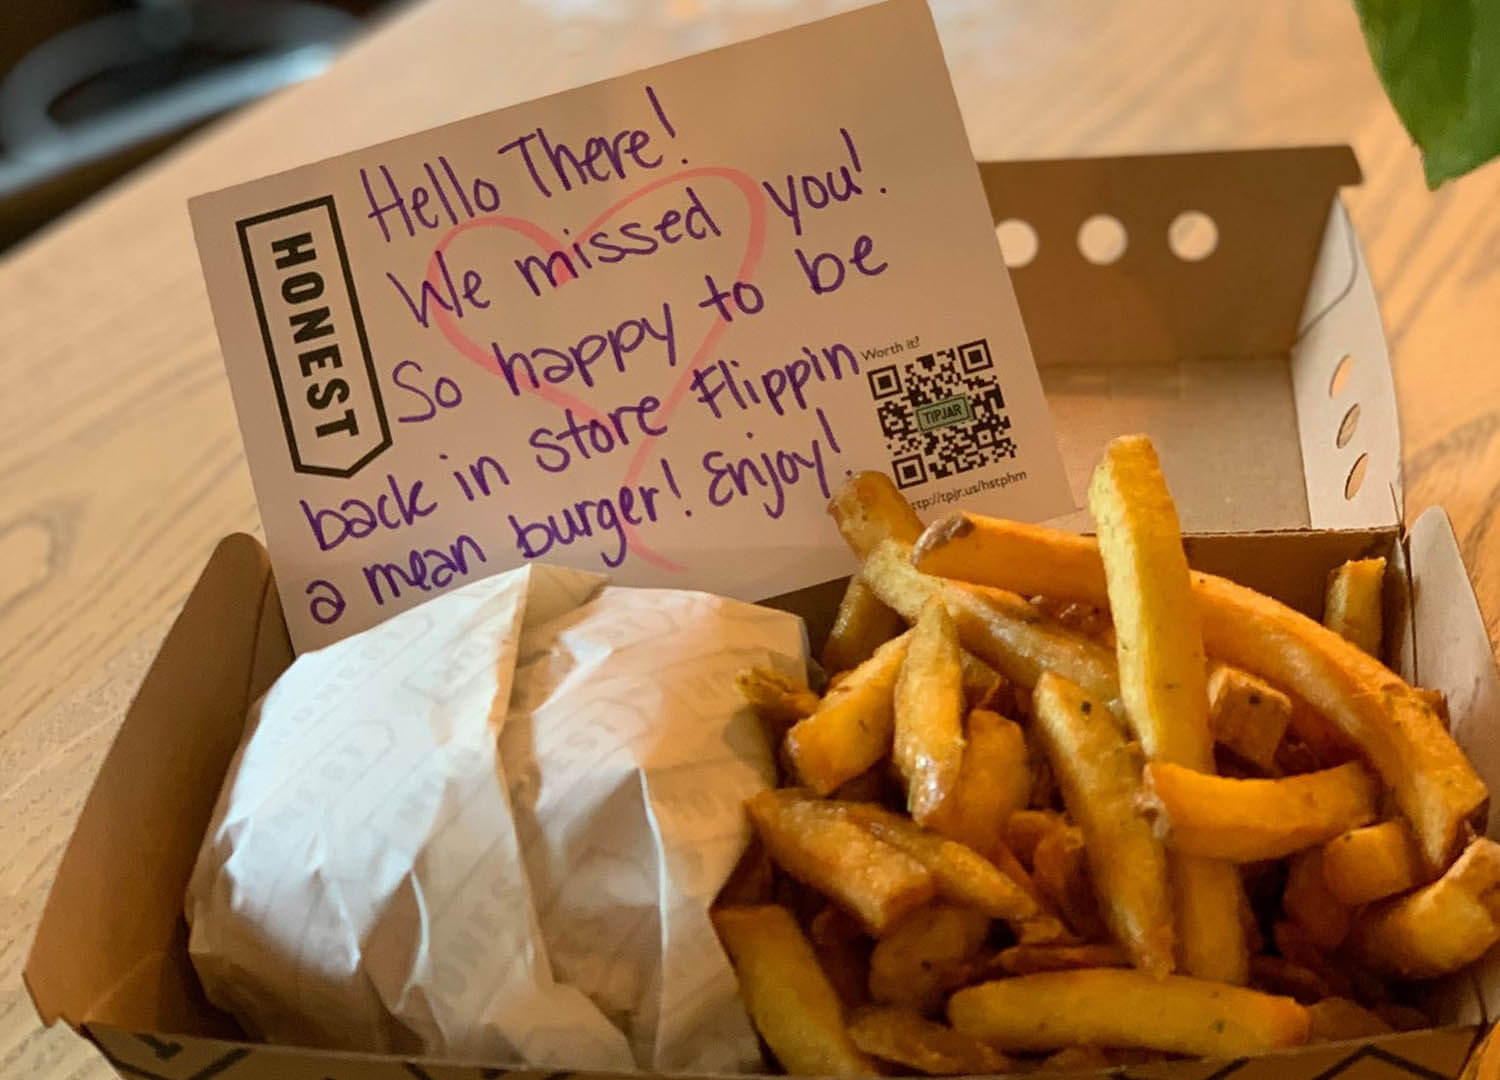 Honest Burgers takeout box, with burger, chips and a thankyou note